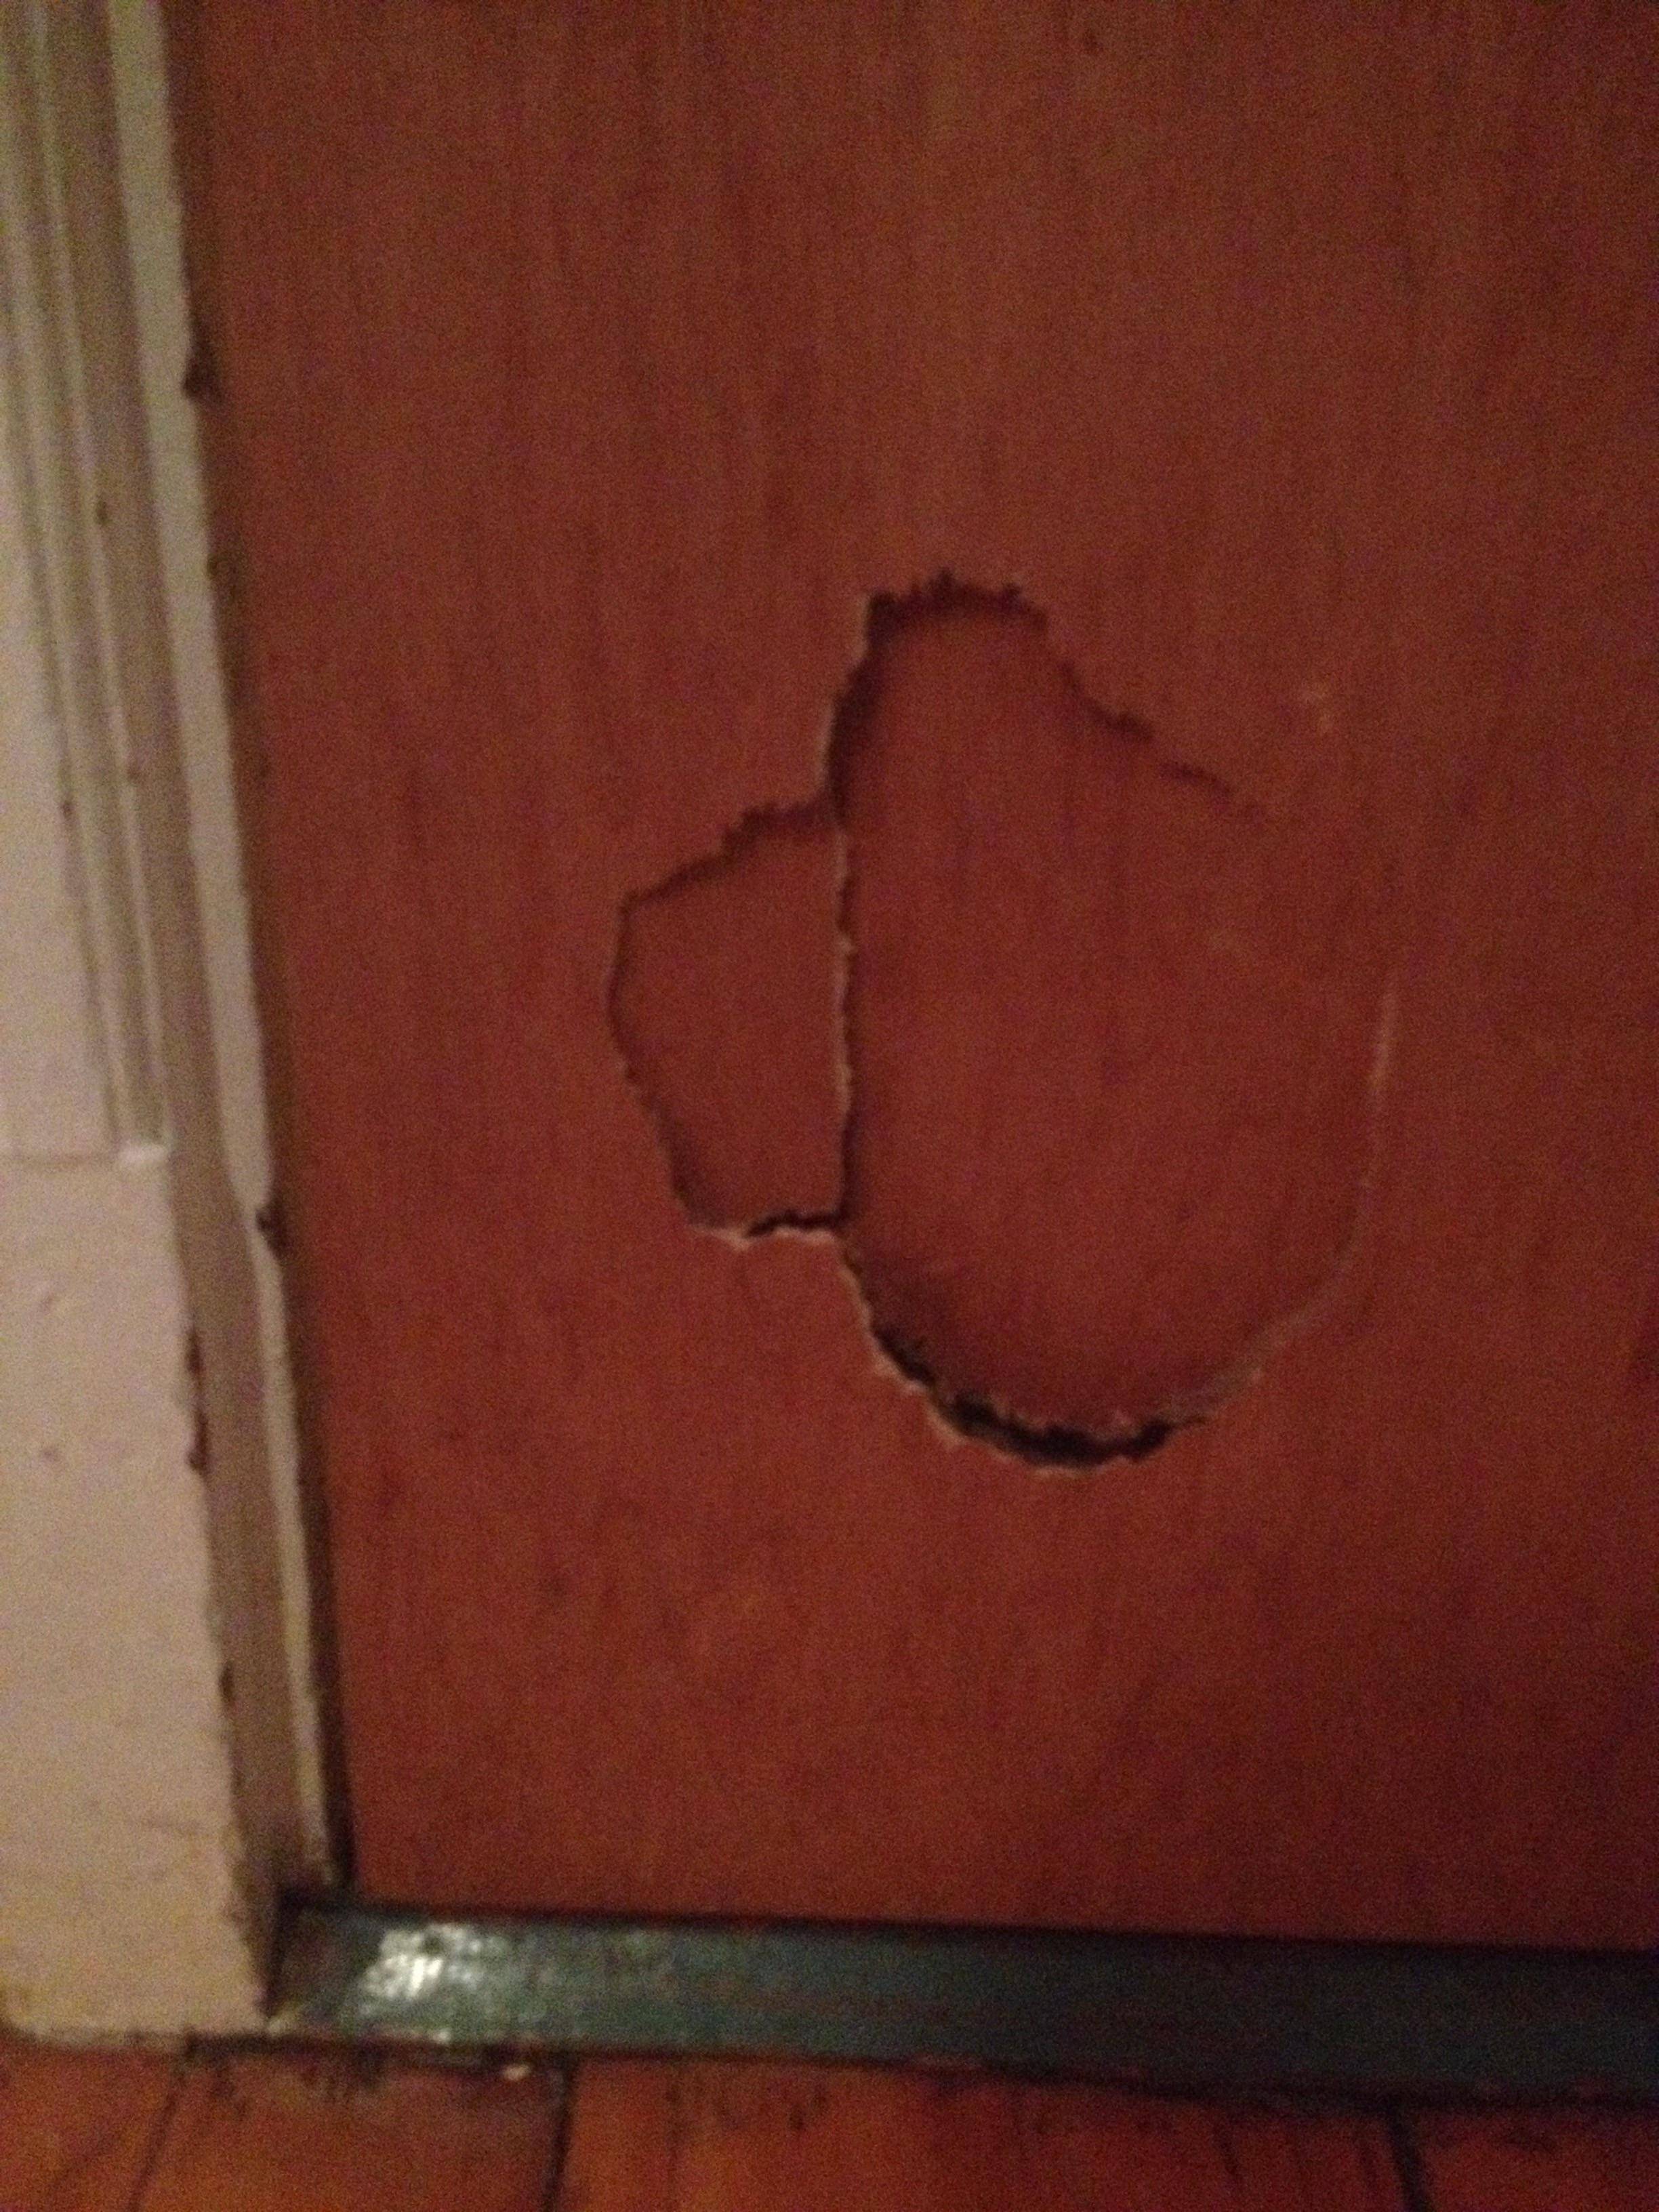 How to fix a cracked center of a hollow wooden door? - home damage ...